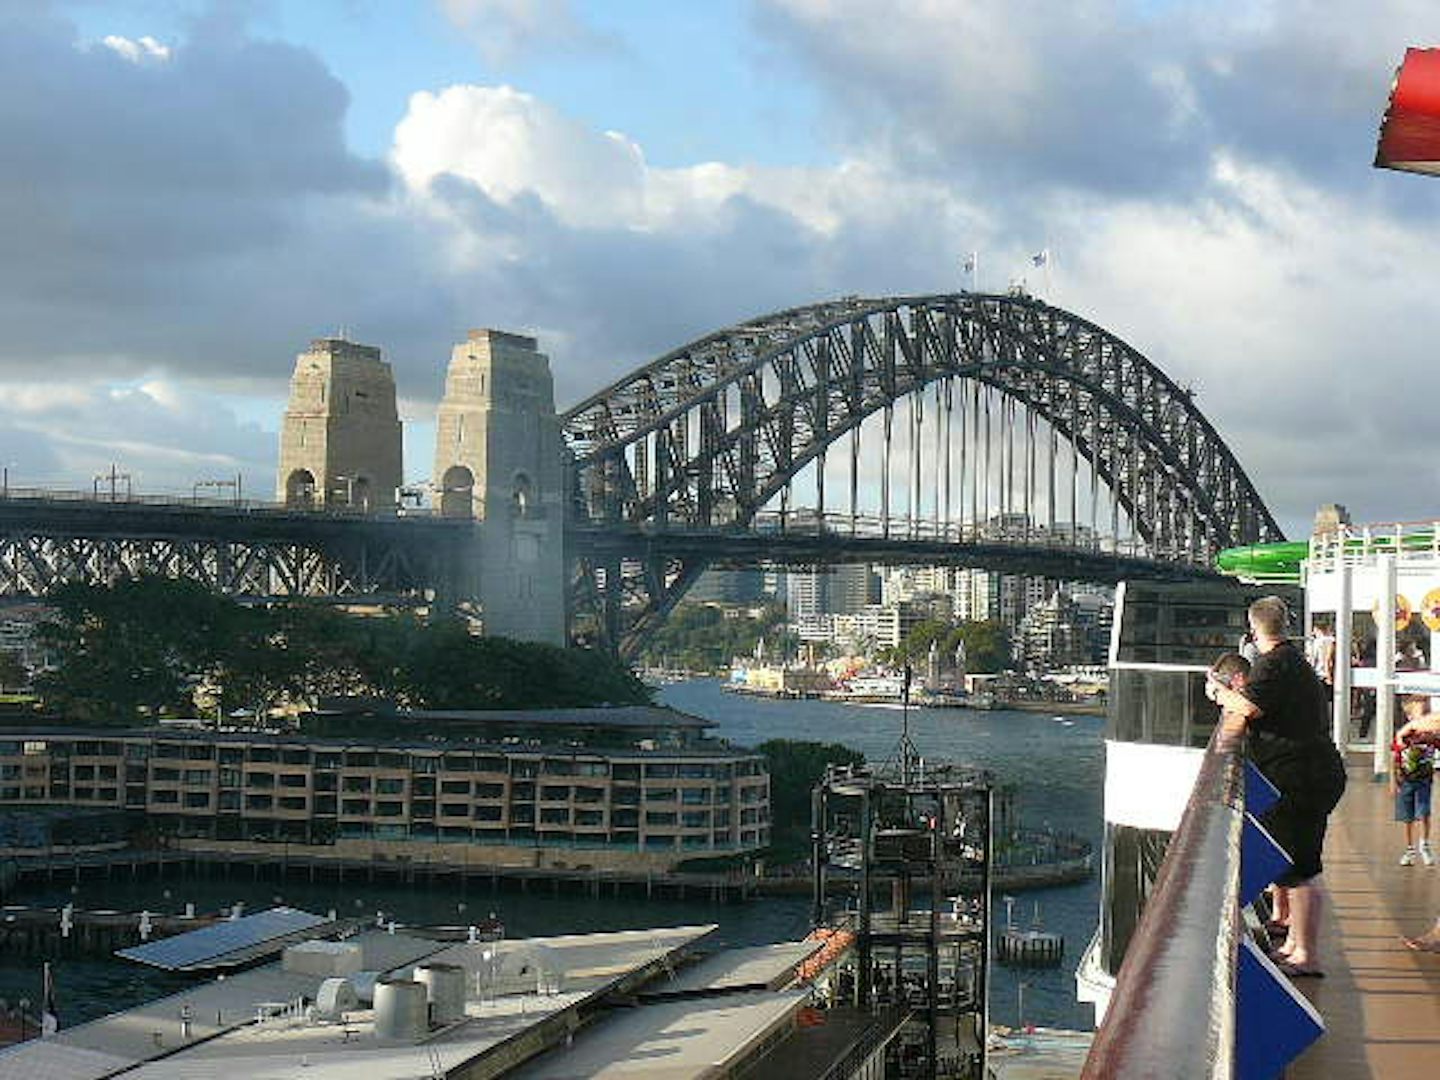 Sydney from the deck